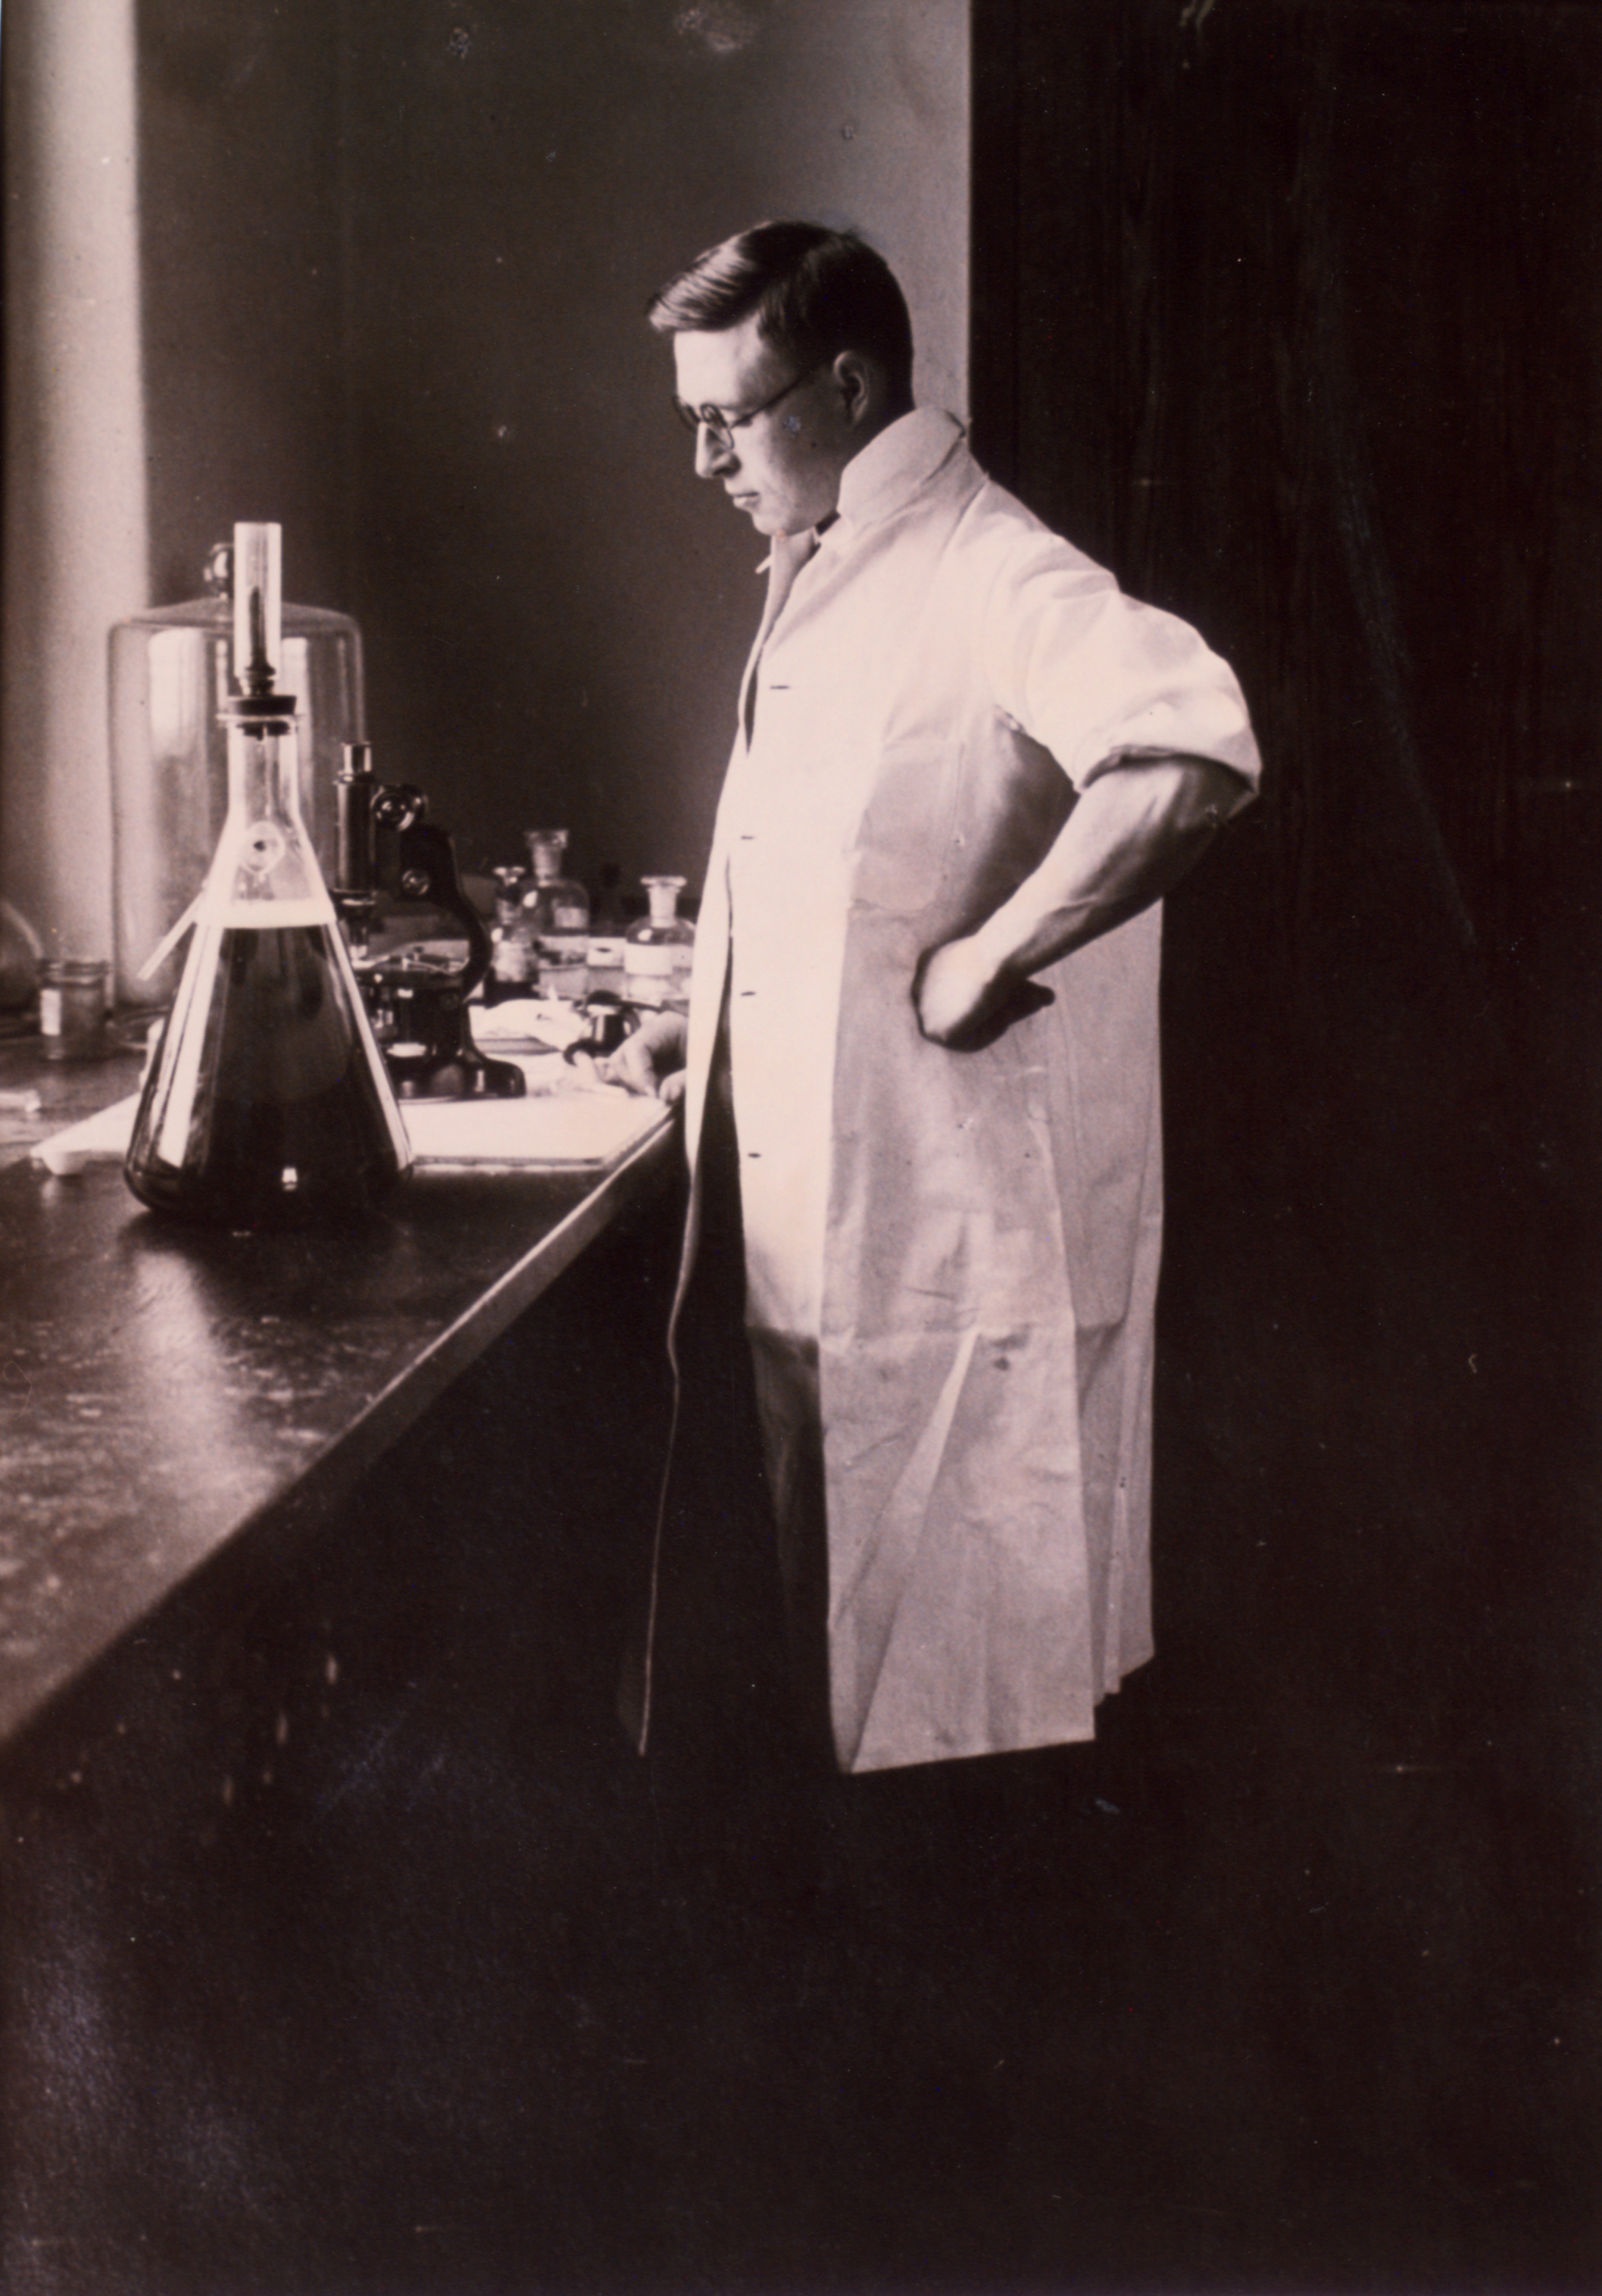 Photograph of James Collip in a laboratory around 1927.